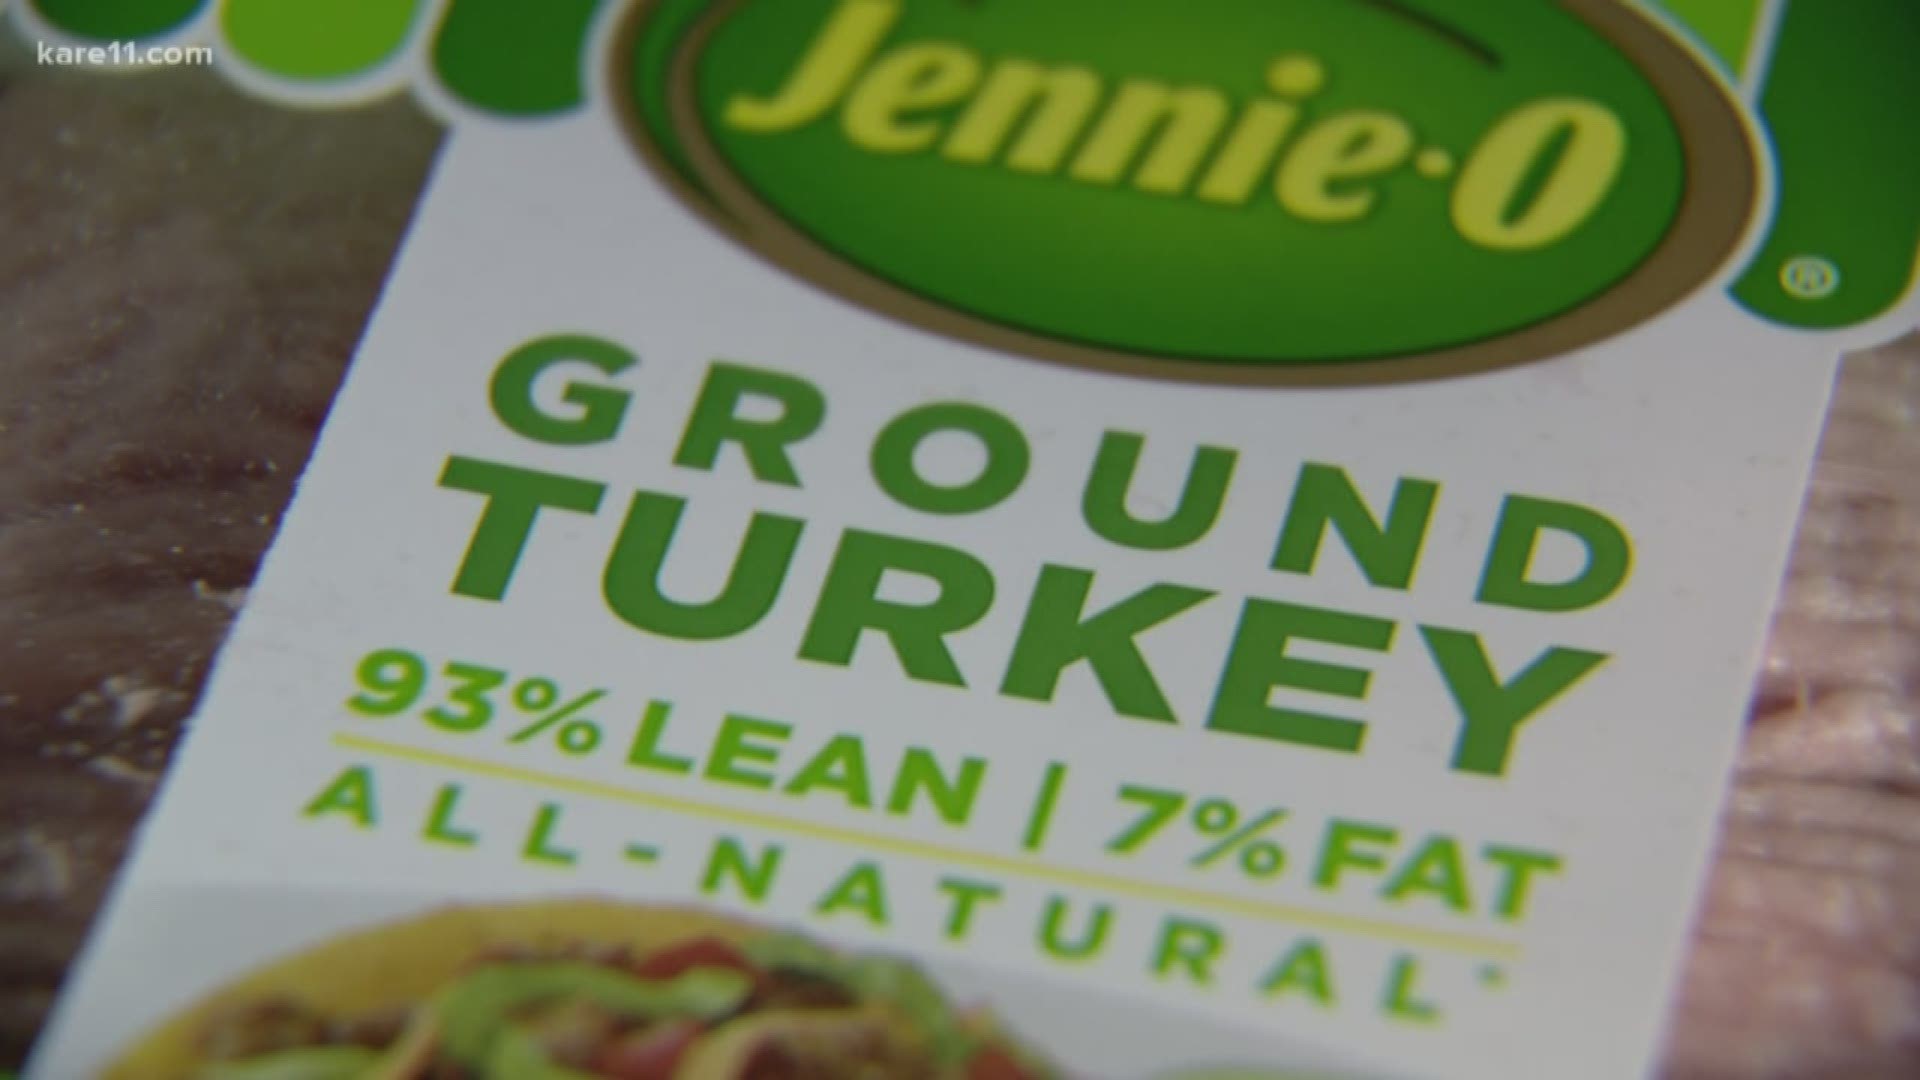 While many are buying their turkeys for the big holiday, Jennie-O has recalled more than 91,000 pounds of ground turkey that could be carrying salmonella.